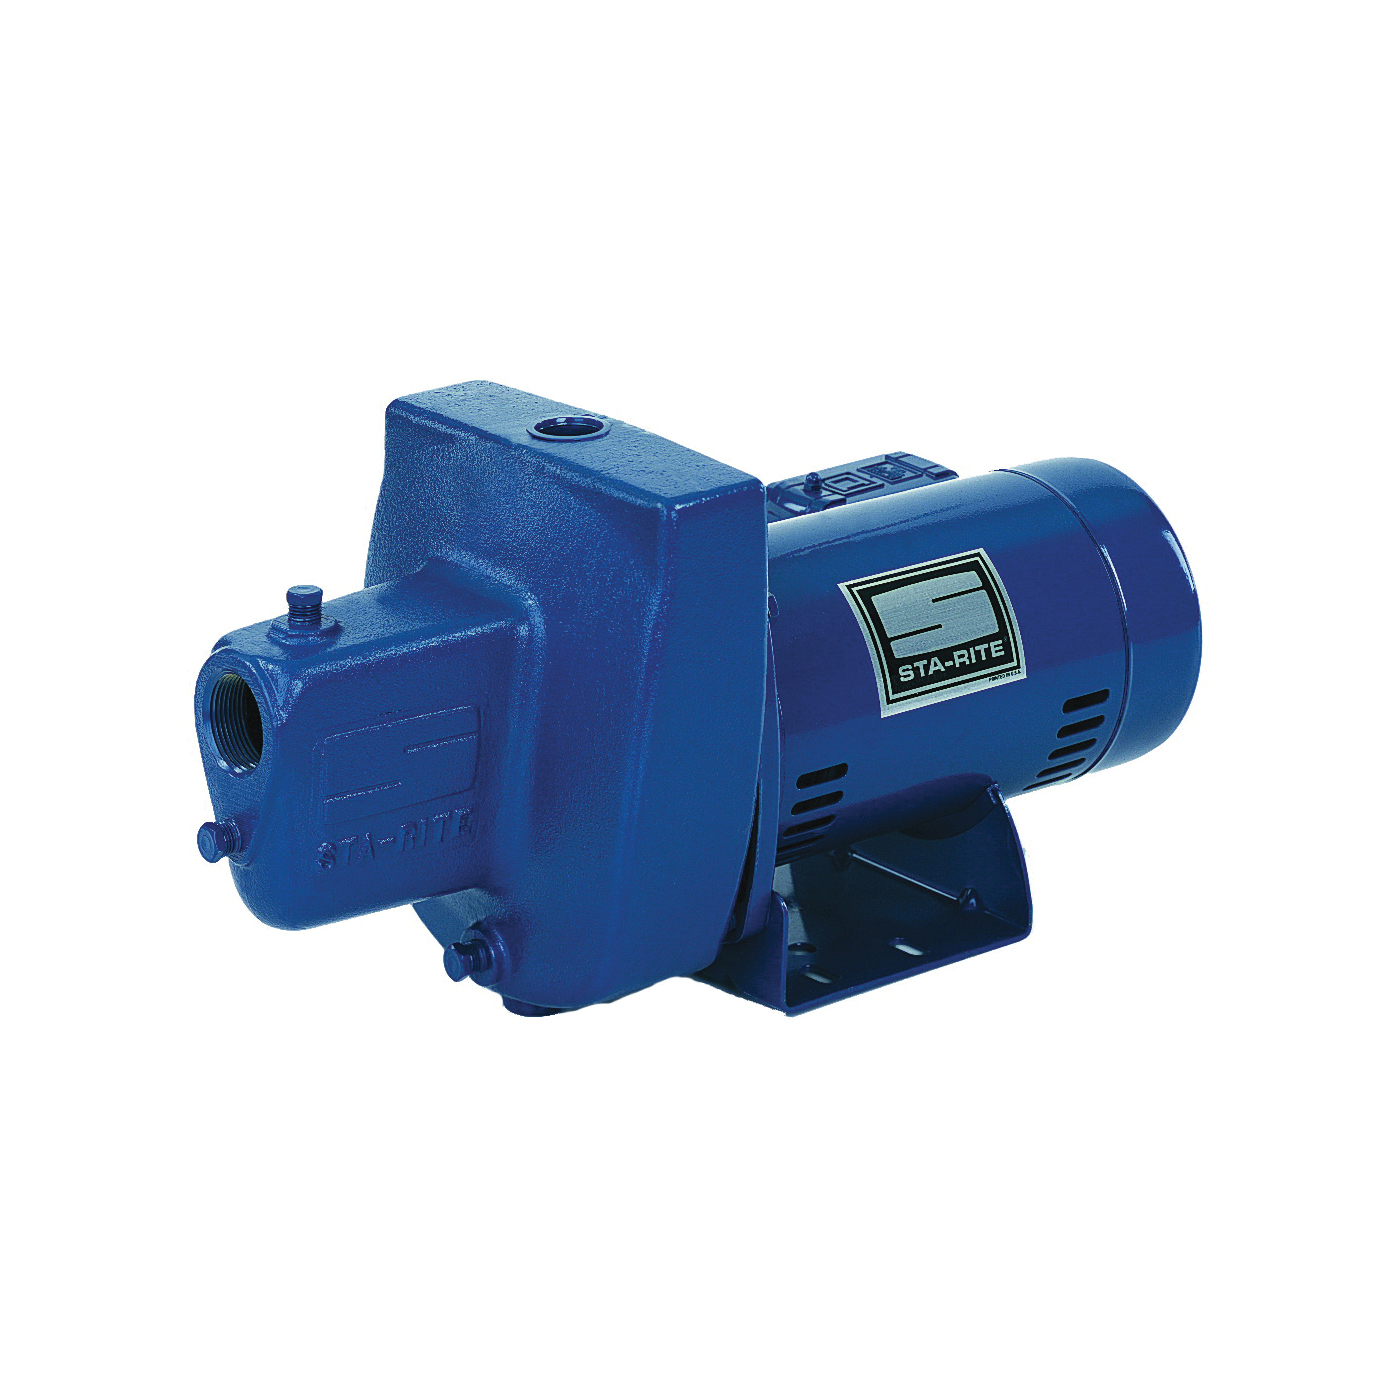 FSNDH Jet Pump, 12.2/6.1 A, 115/230 V, 0.75 hp, 1-1/4 in Suction, 1 in Discharge Connection, Iron